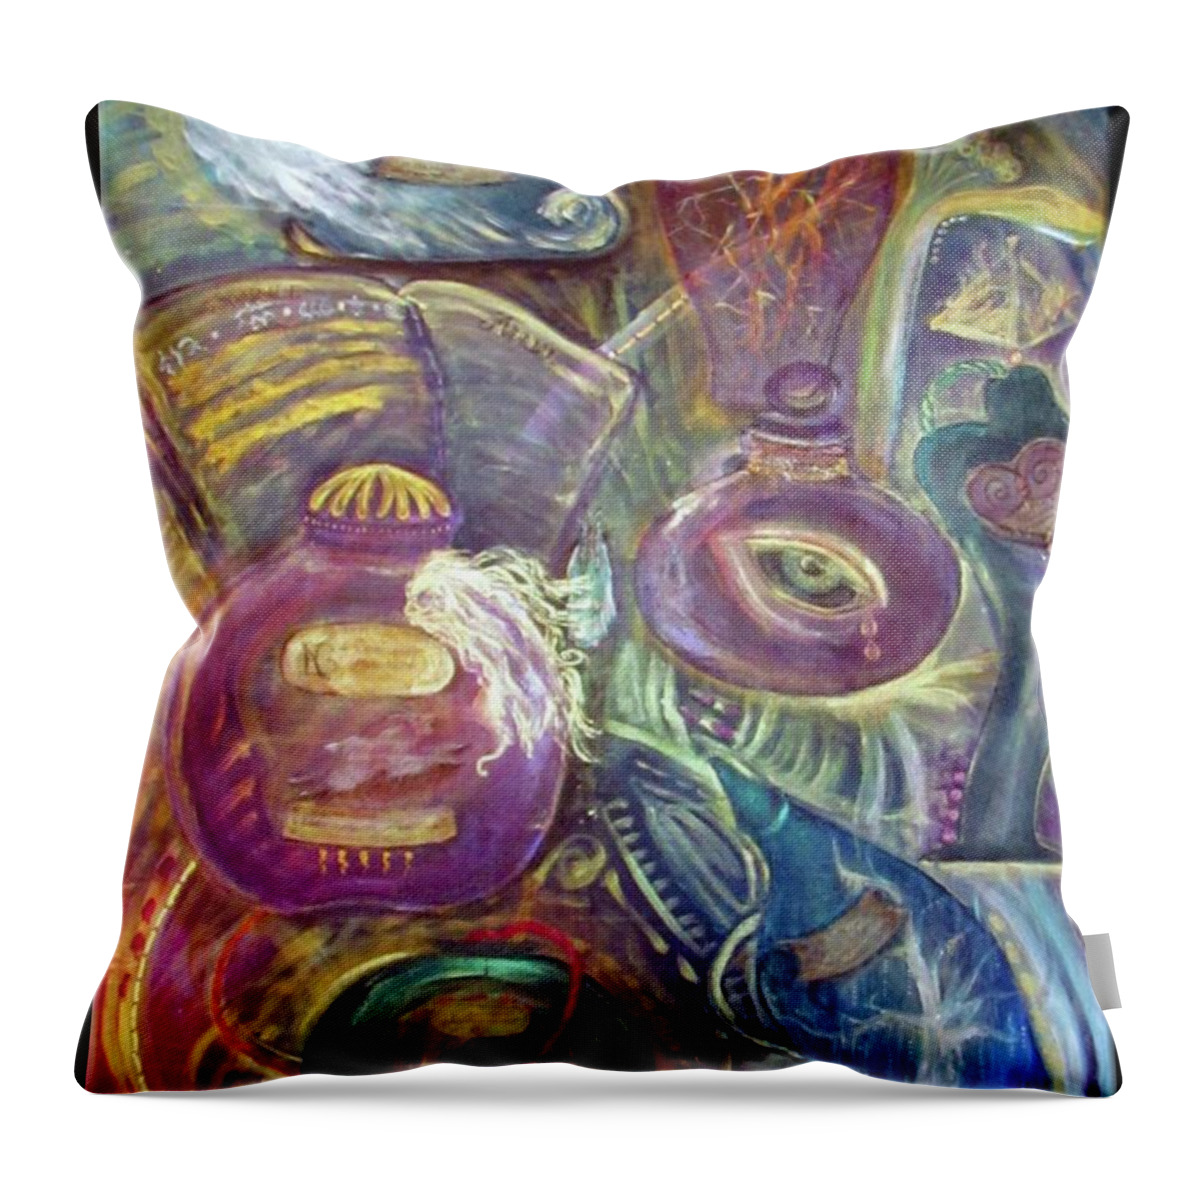 Apothecary Throw Pillow featuring the painting Esoterica's Apothecary by Feather Redfox